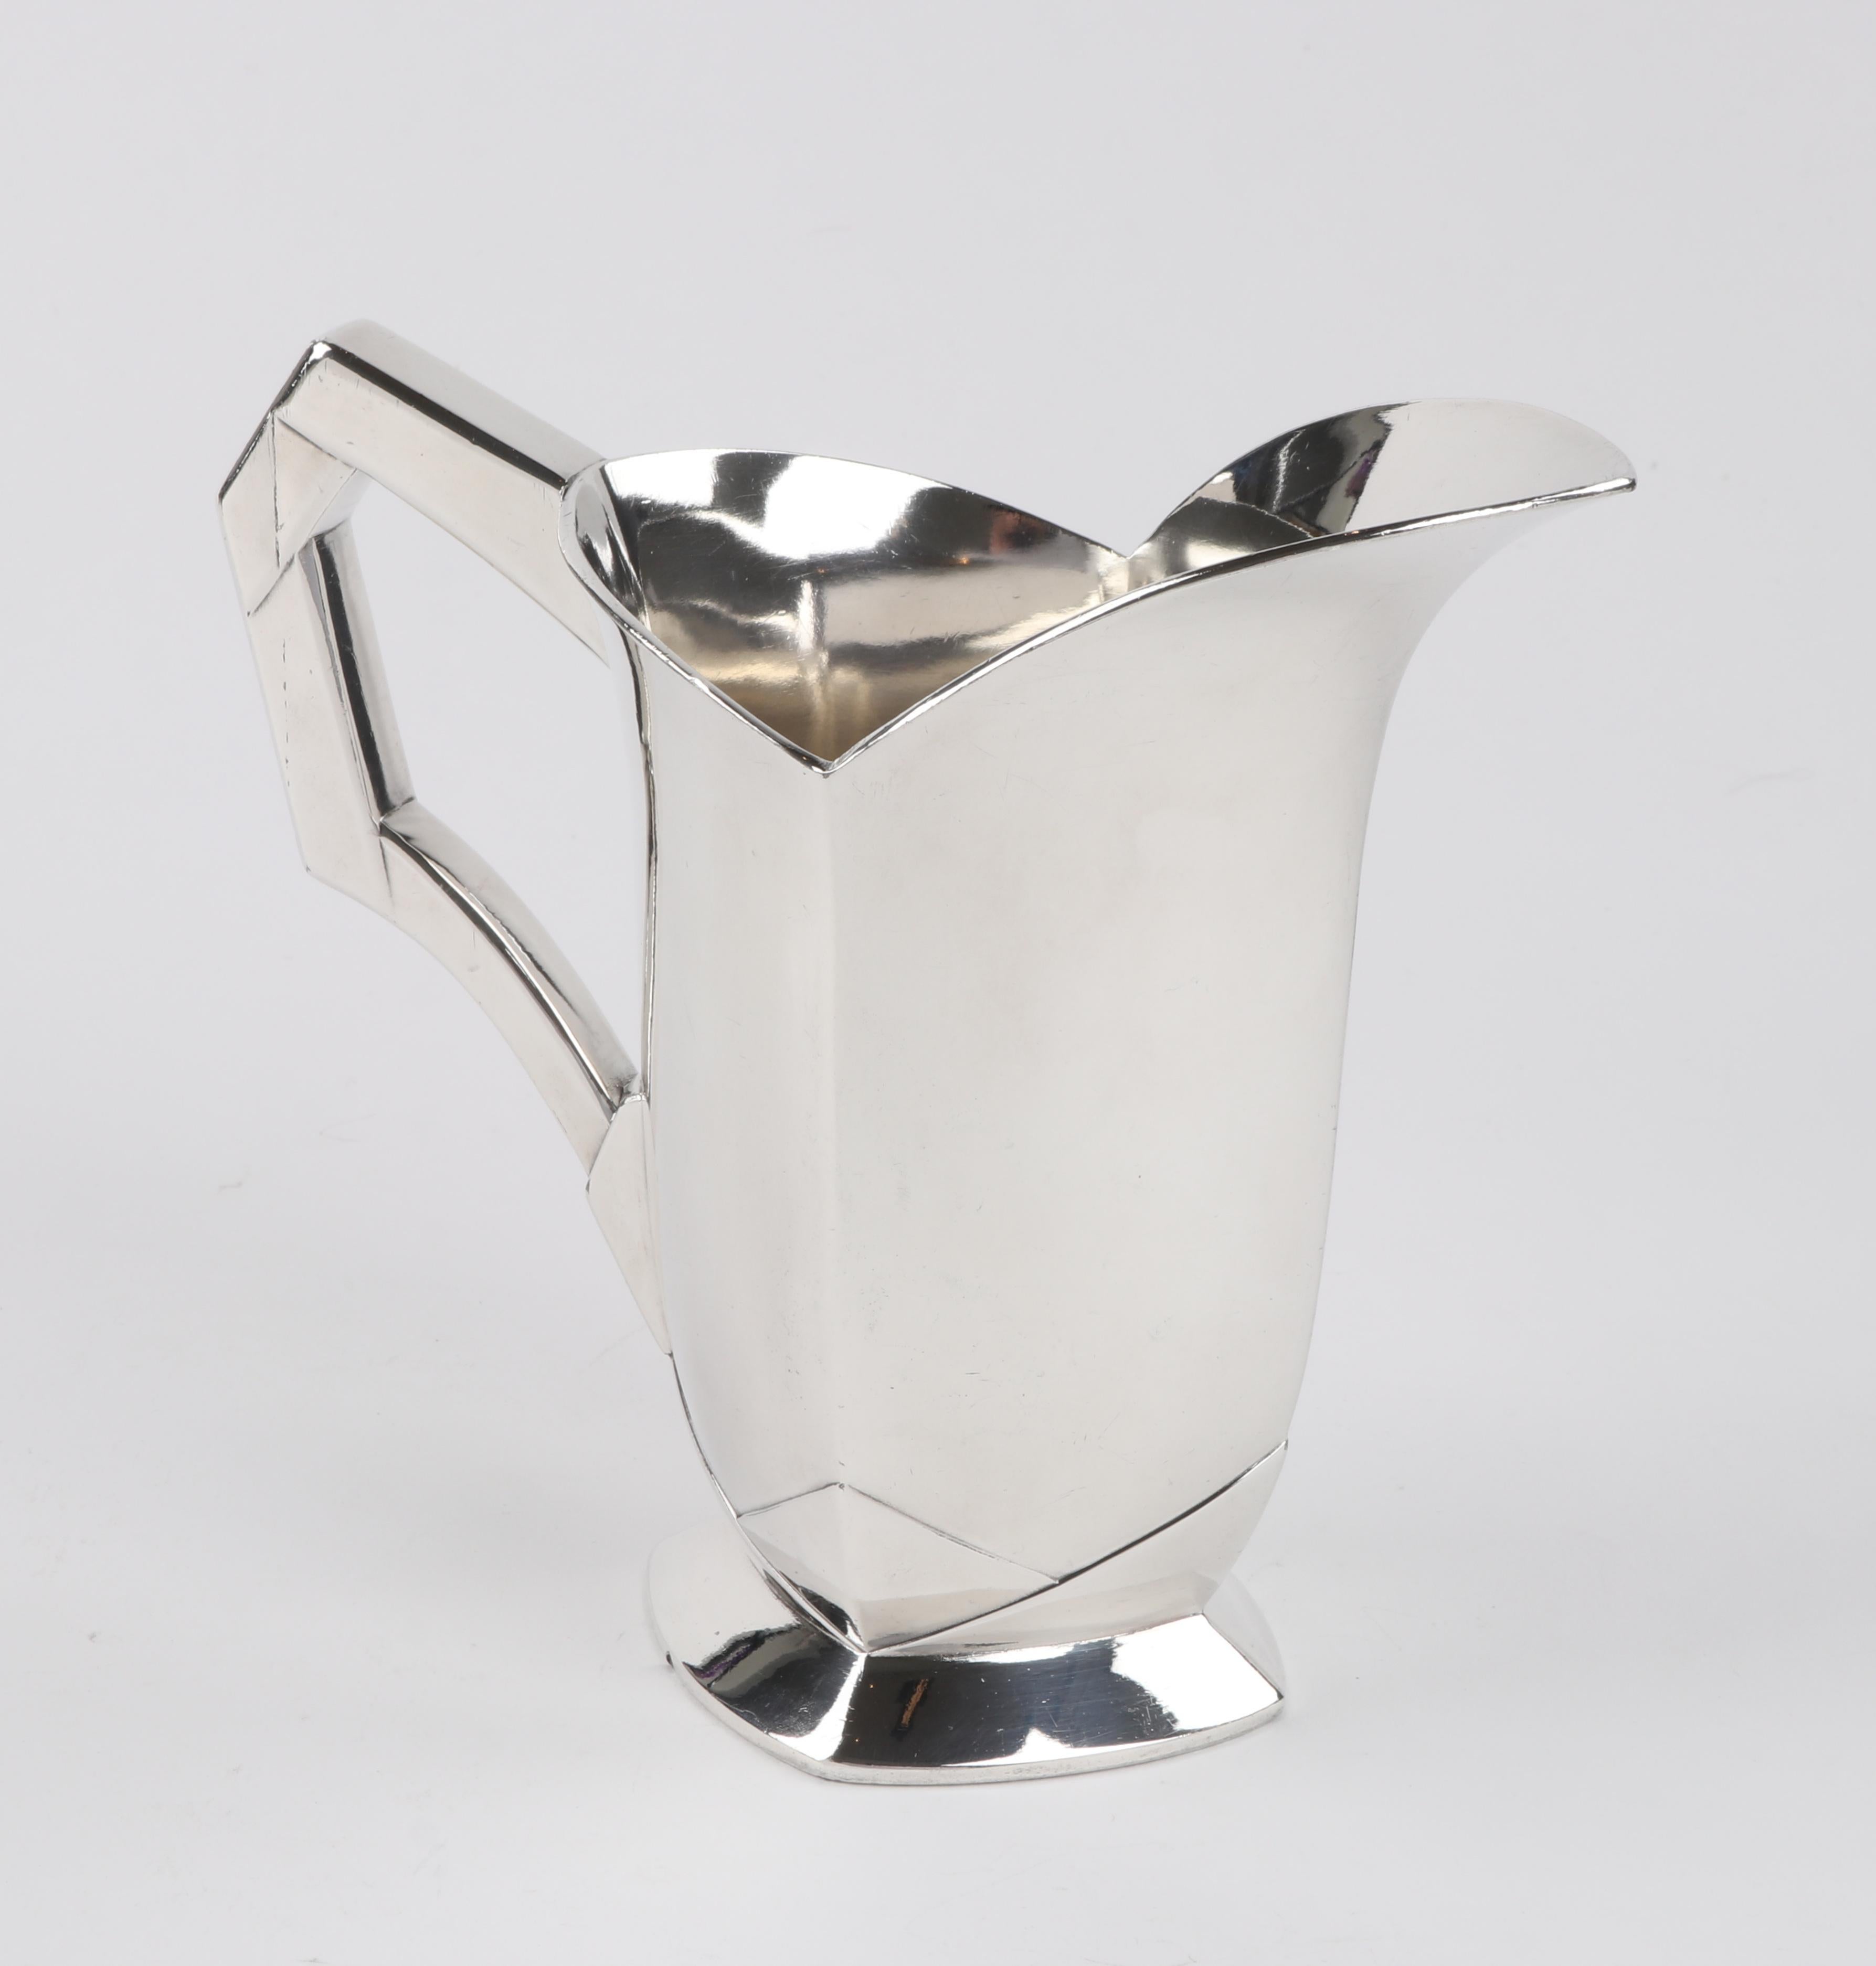 French Gallia circa 1920s Art Deco Süe & Mare for Christofle Silver Plated Jug Pitcher For Sale